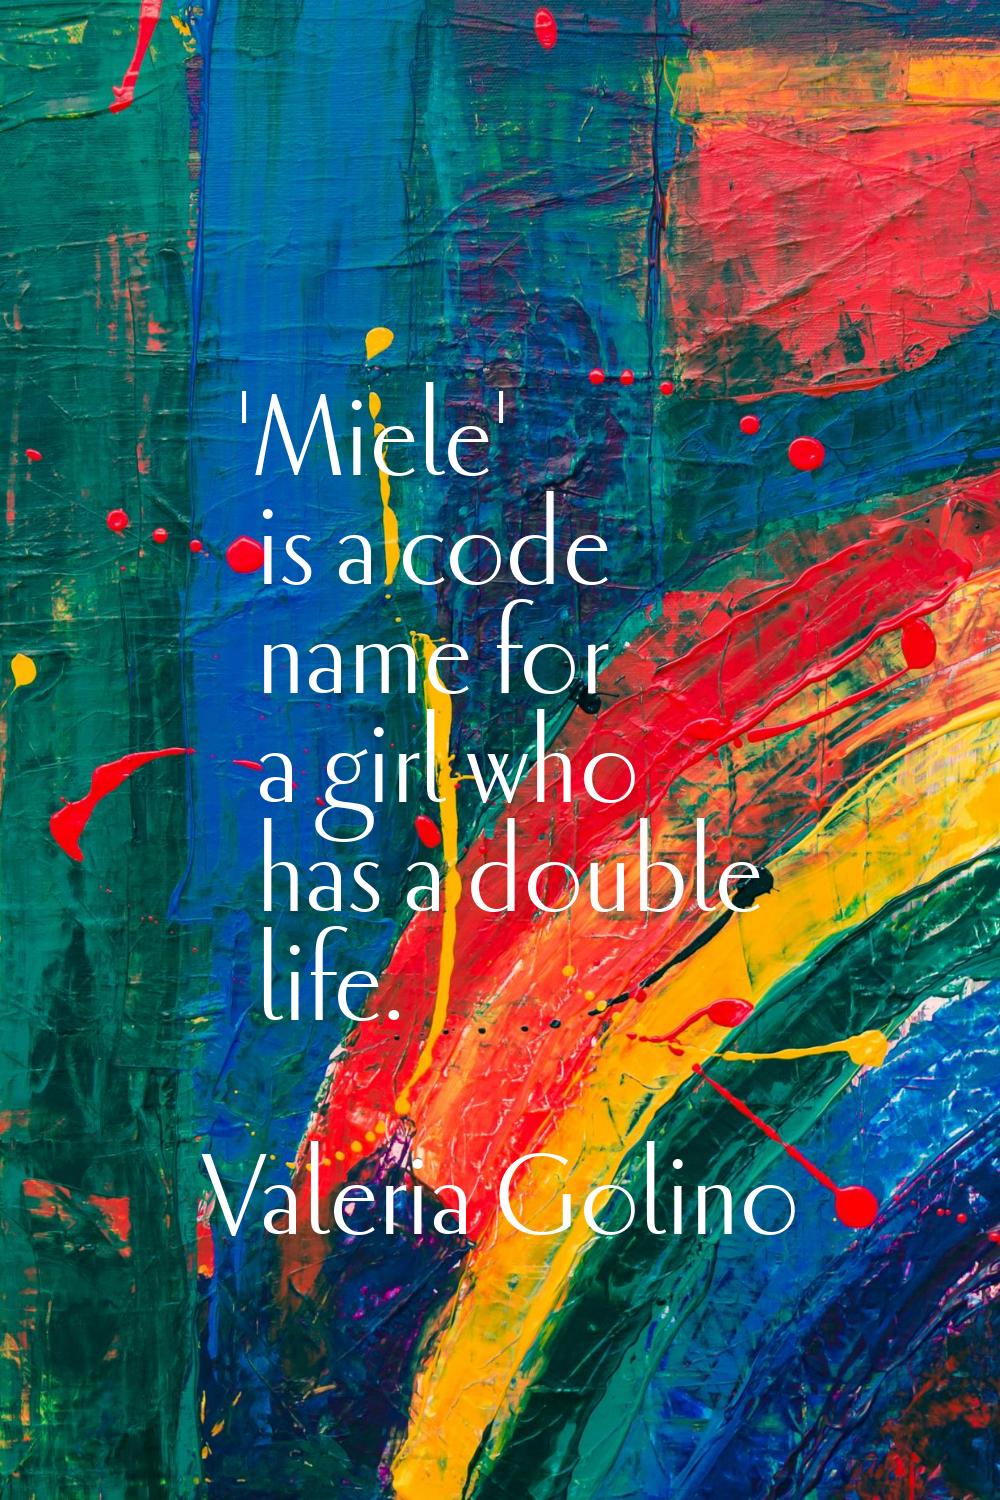 'Miele' is a code name for a girl who has a double life.